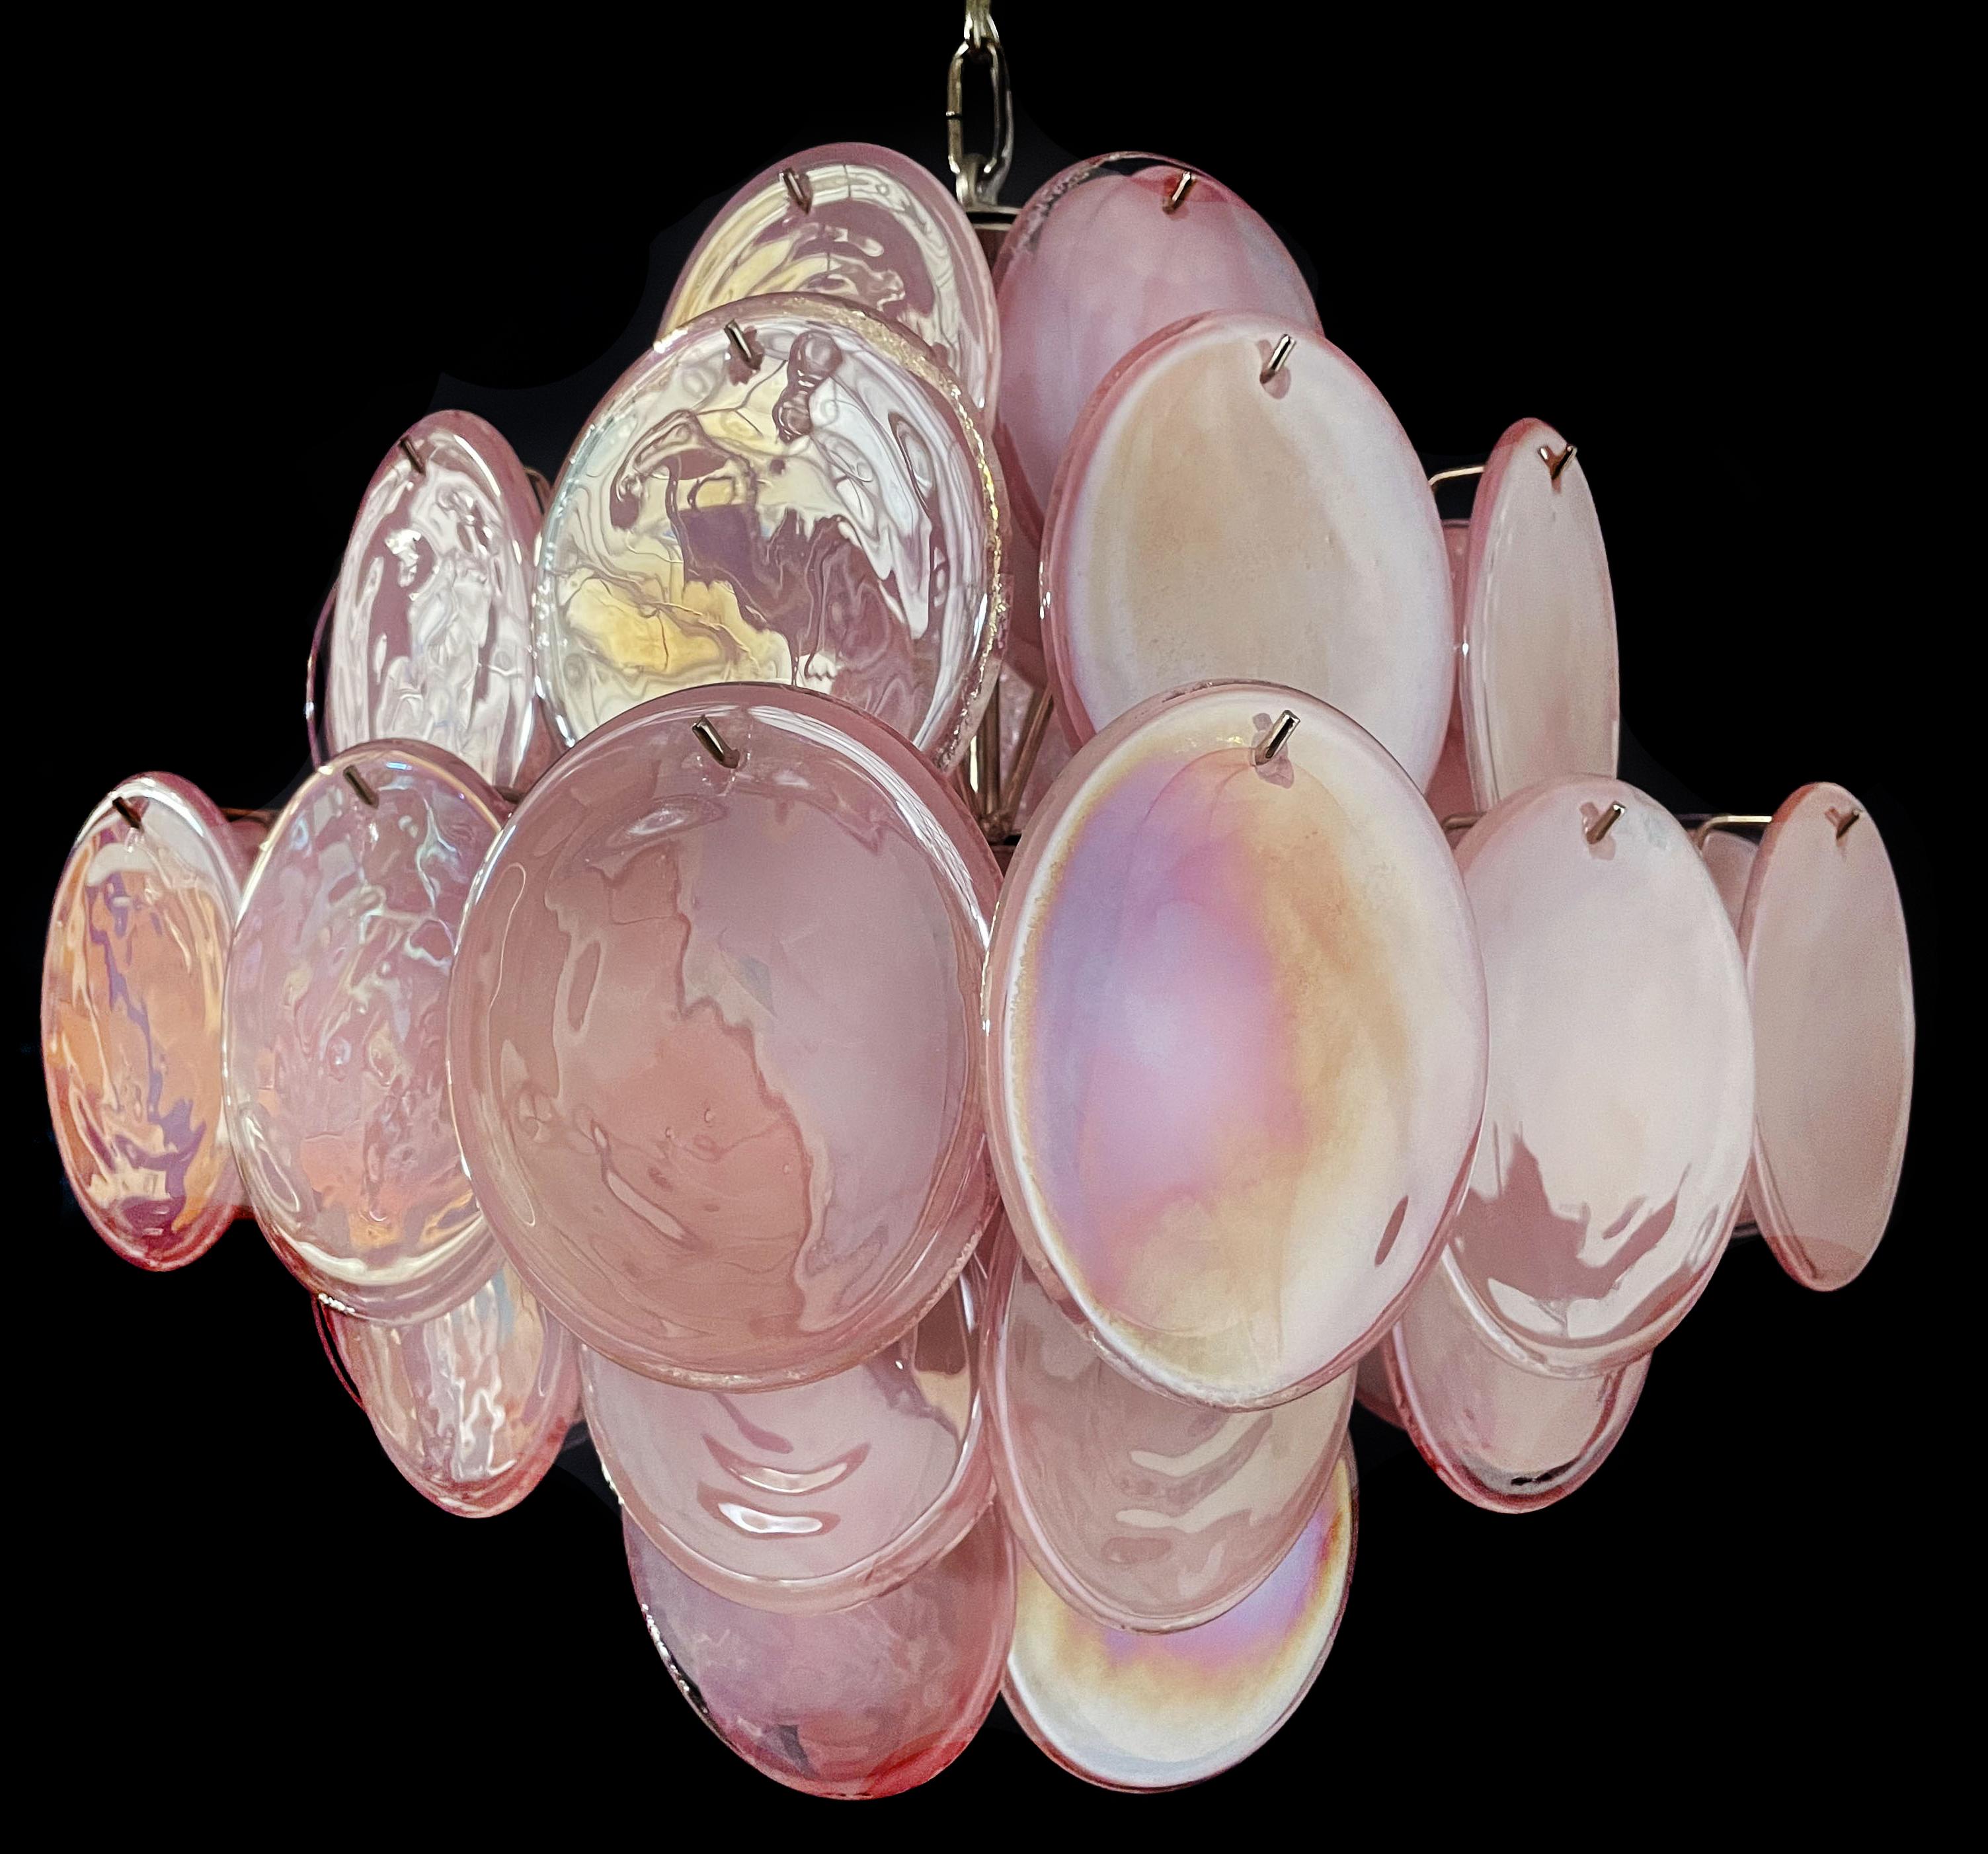 Amazing Italian Murano chandelier in Vistosi style. The chandelier has 36 fantastic iridescent alabaster pink discs in a nickel metal frame.
Period: late XX century
Dimensions: 44,50 inches (150 cm) height with chain; 19,40 inches (50 cm) height